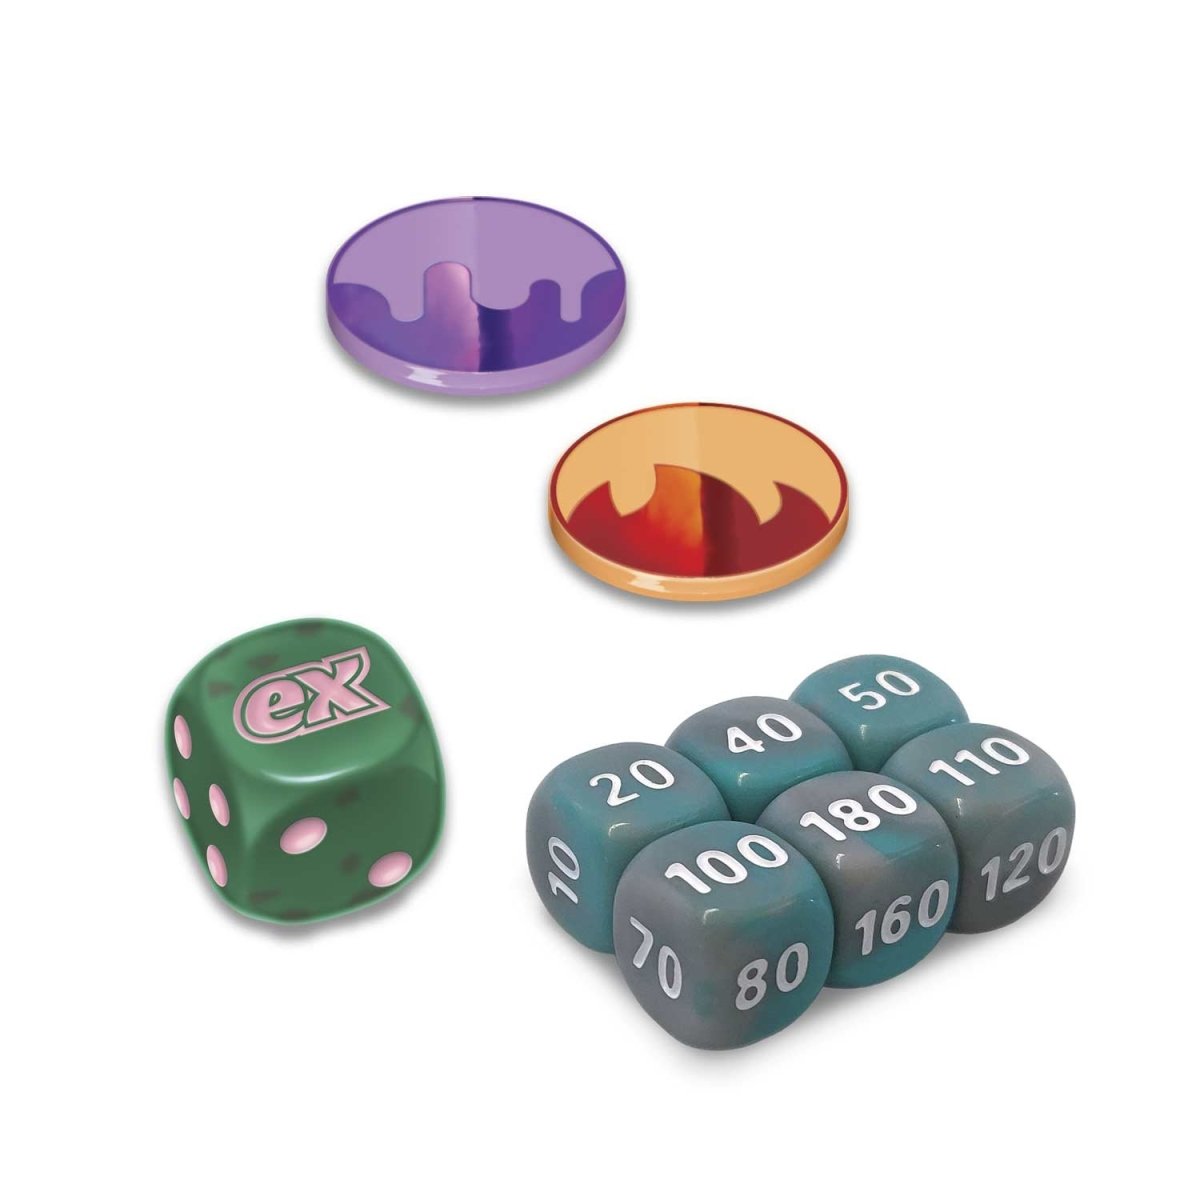 counters and dice